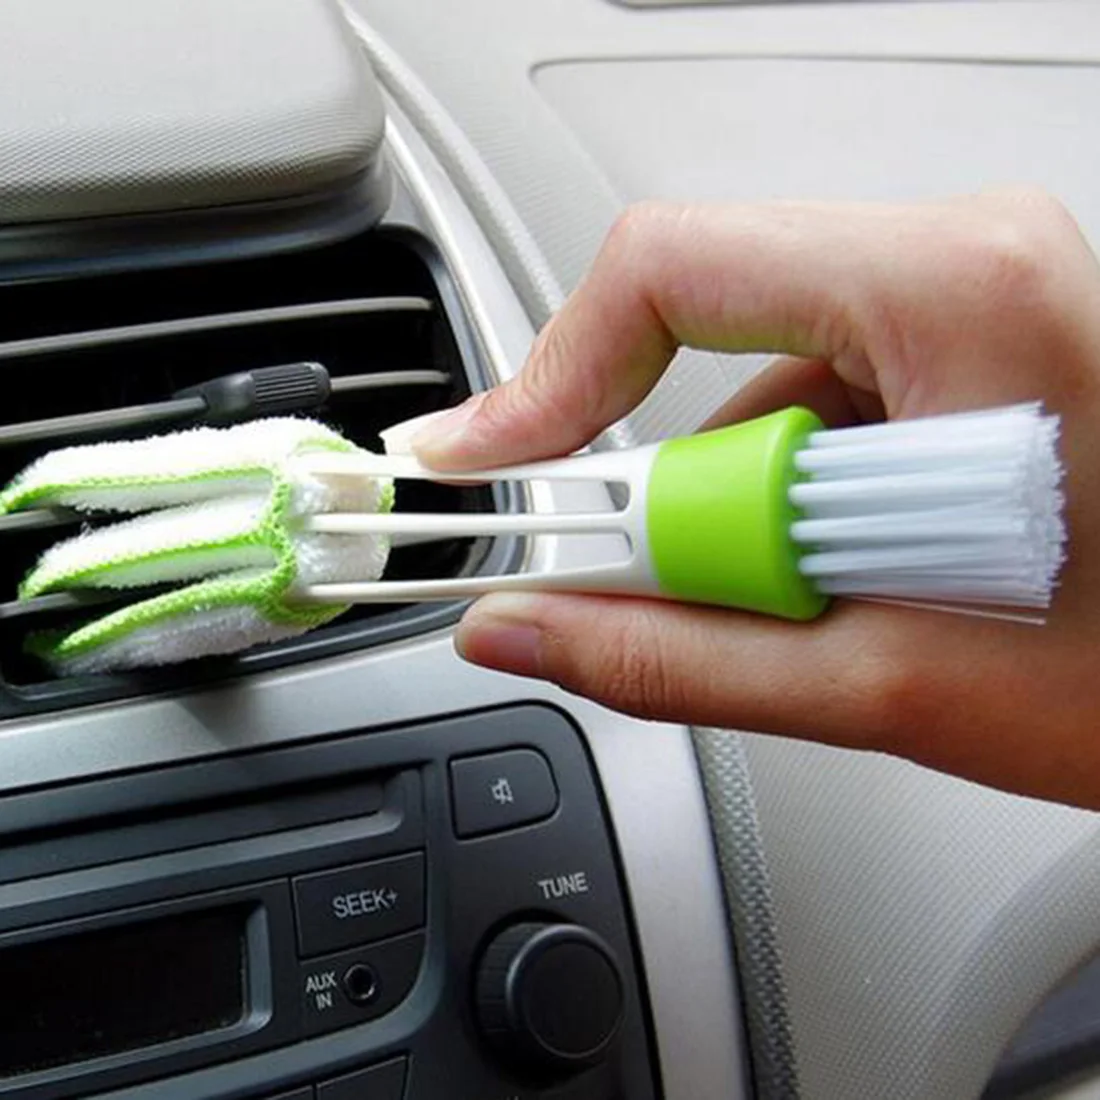 

1PC Car Washer Microfiber Car Cleaning Brush For Air-condition Cleaner Computer Blinds Duster Car Care Clean Tools